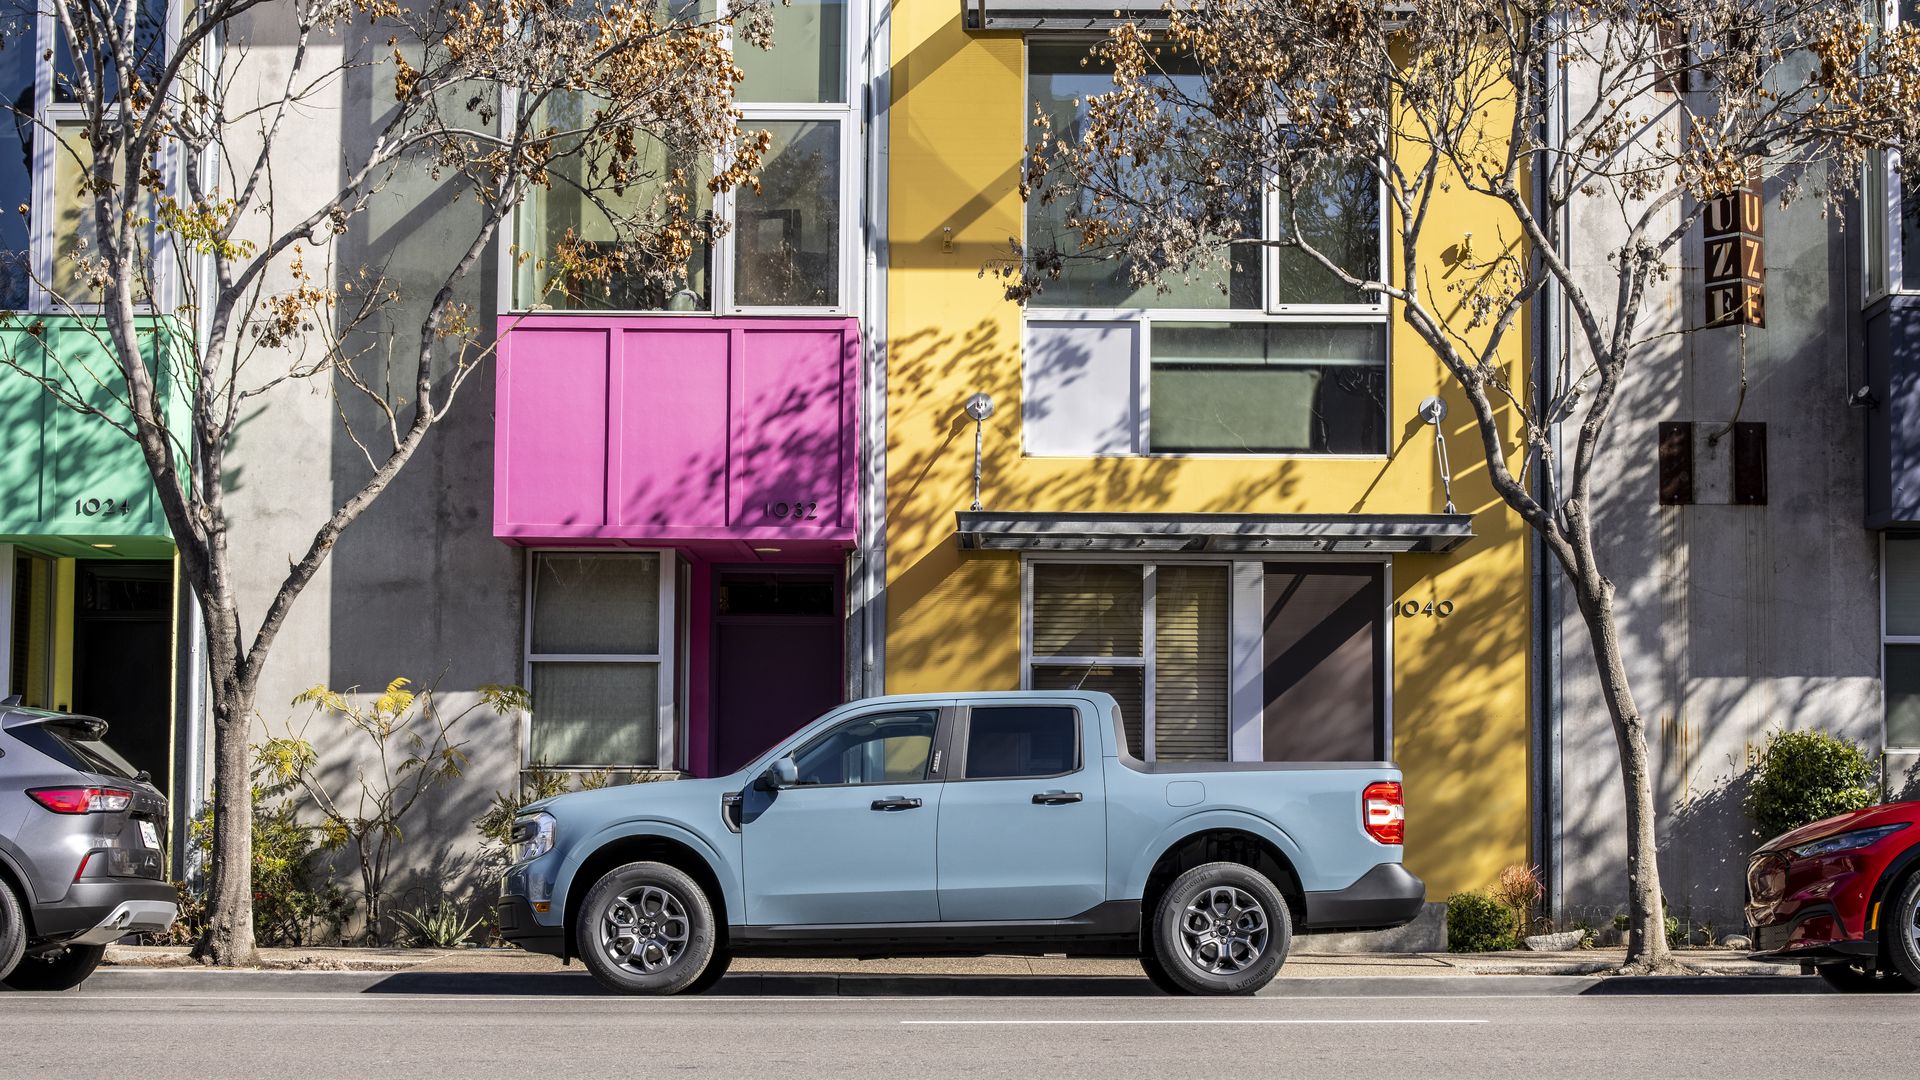 A light blue 2022 Ford Maverick pickup parked in front of a colorful building